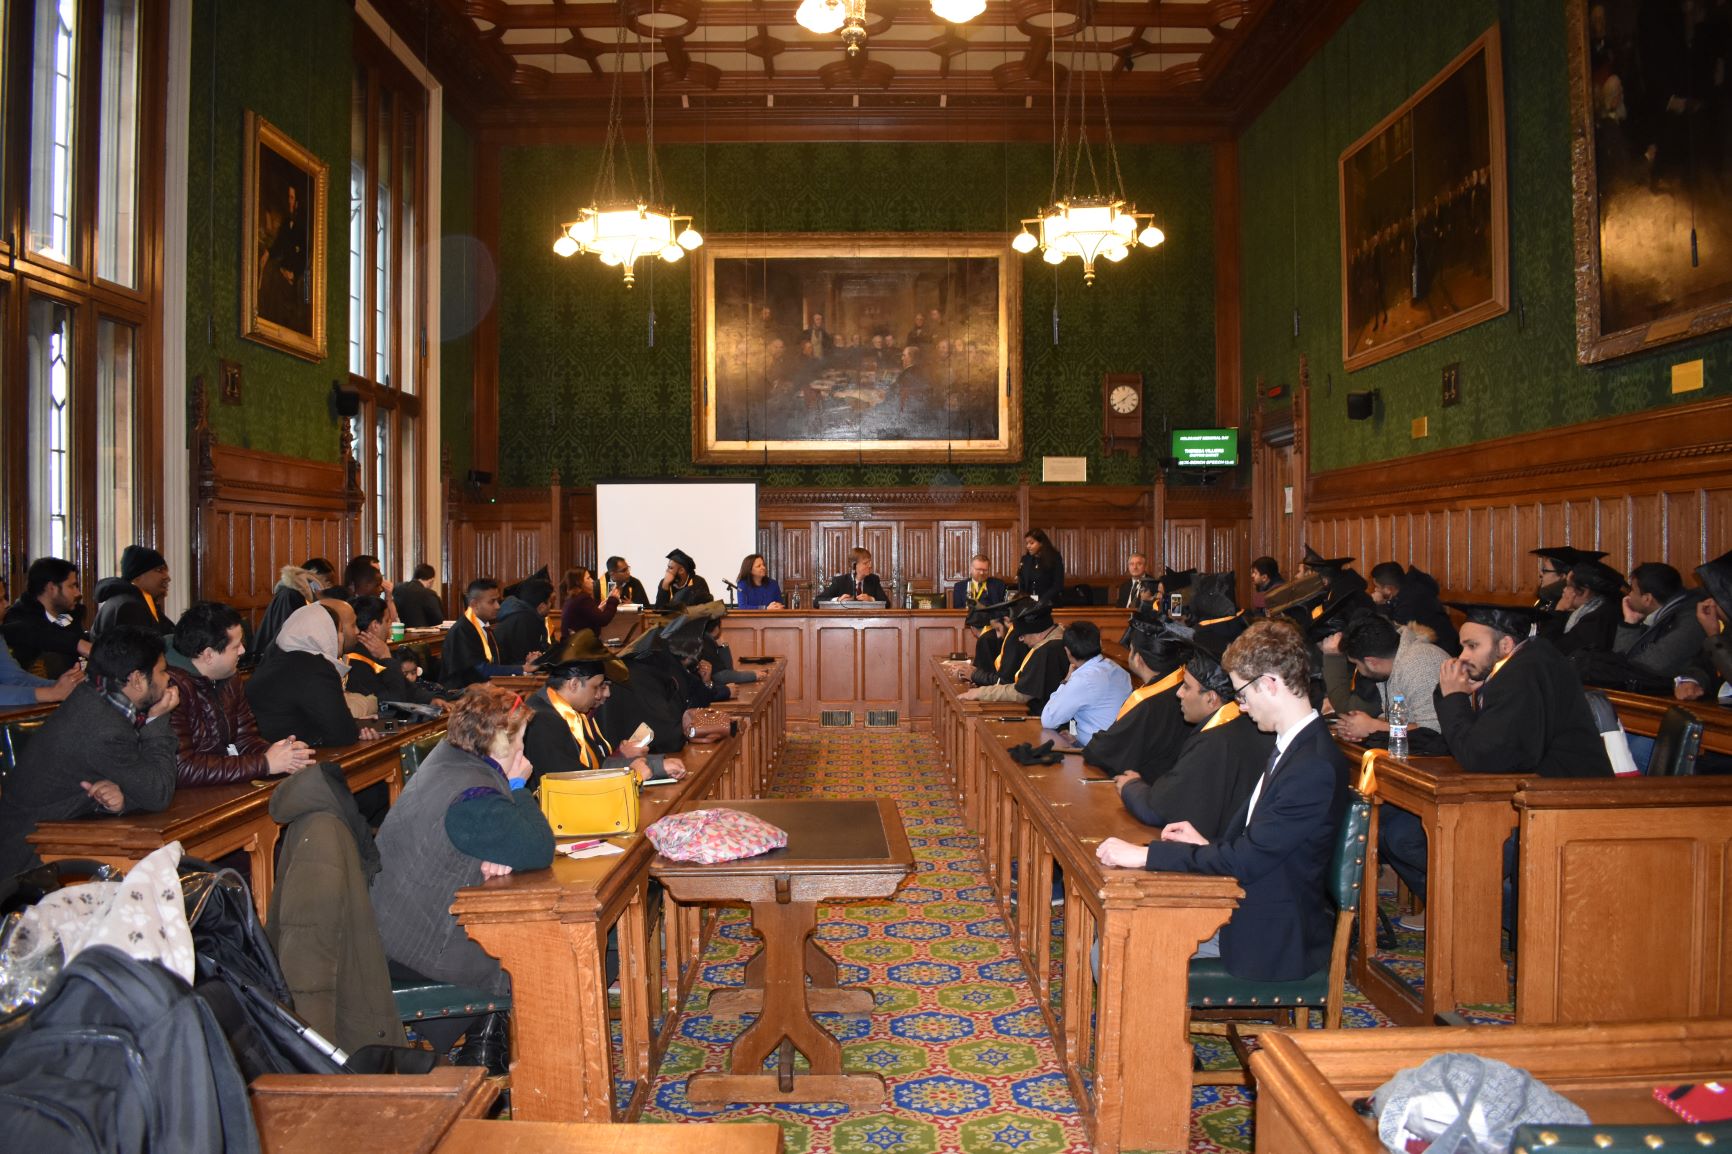 five years in limbo international students go to westminster to call for justice